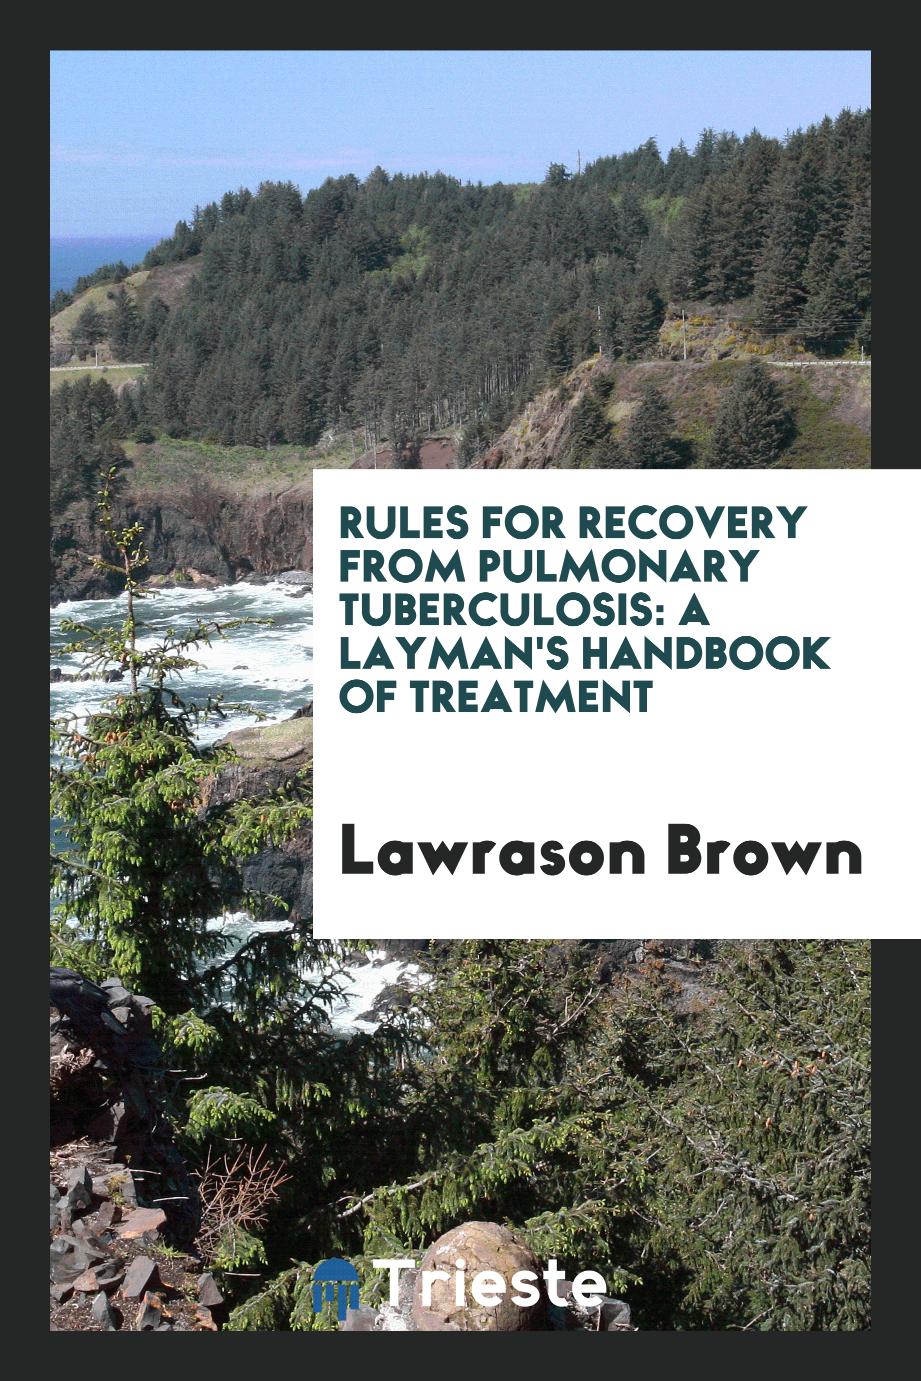 Rules for Recovery from Pulmonary Tuberculosis: A Layman's Handbook of Treatment